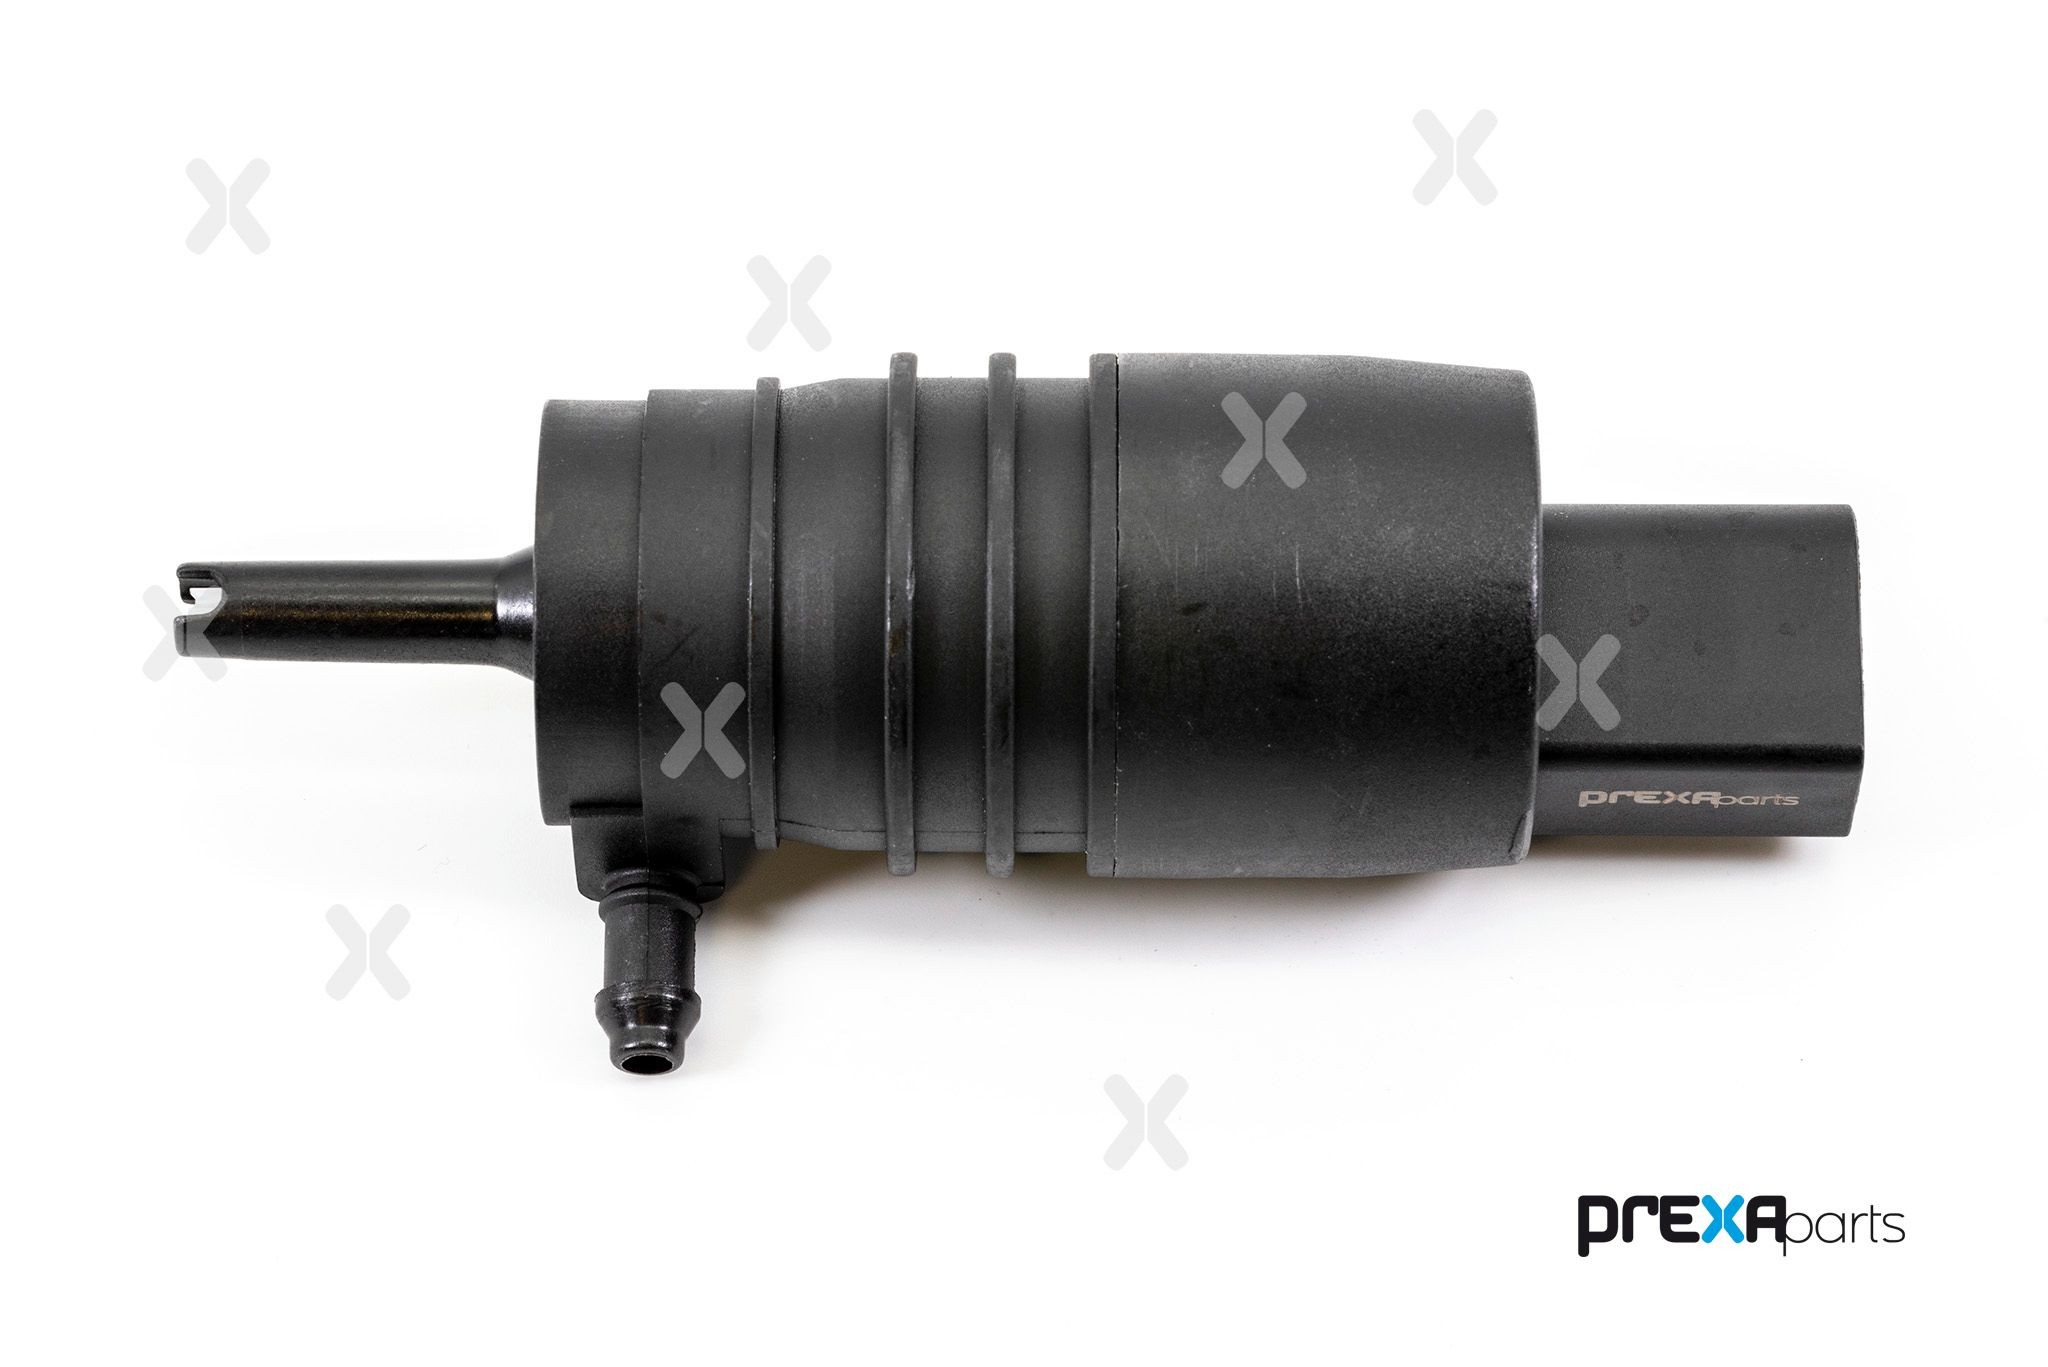 PREXAparts 12V Number of connectors: 2 Windshield Washer Pump P108004 buy